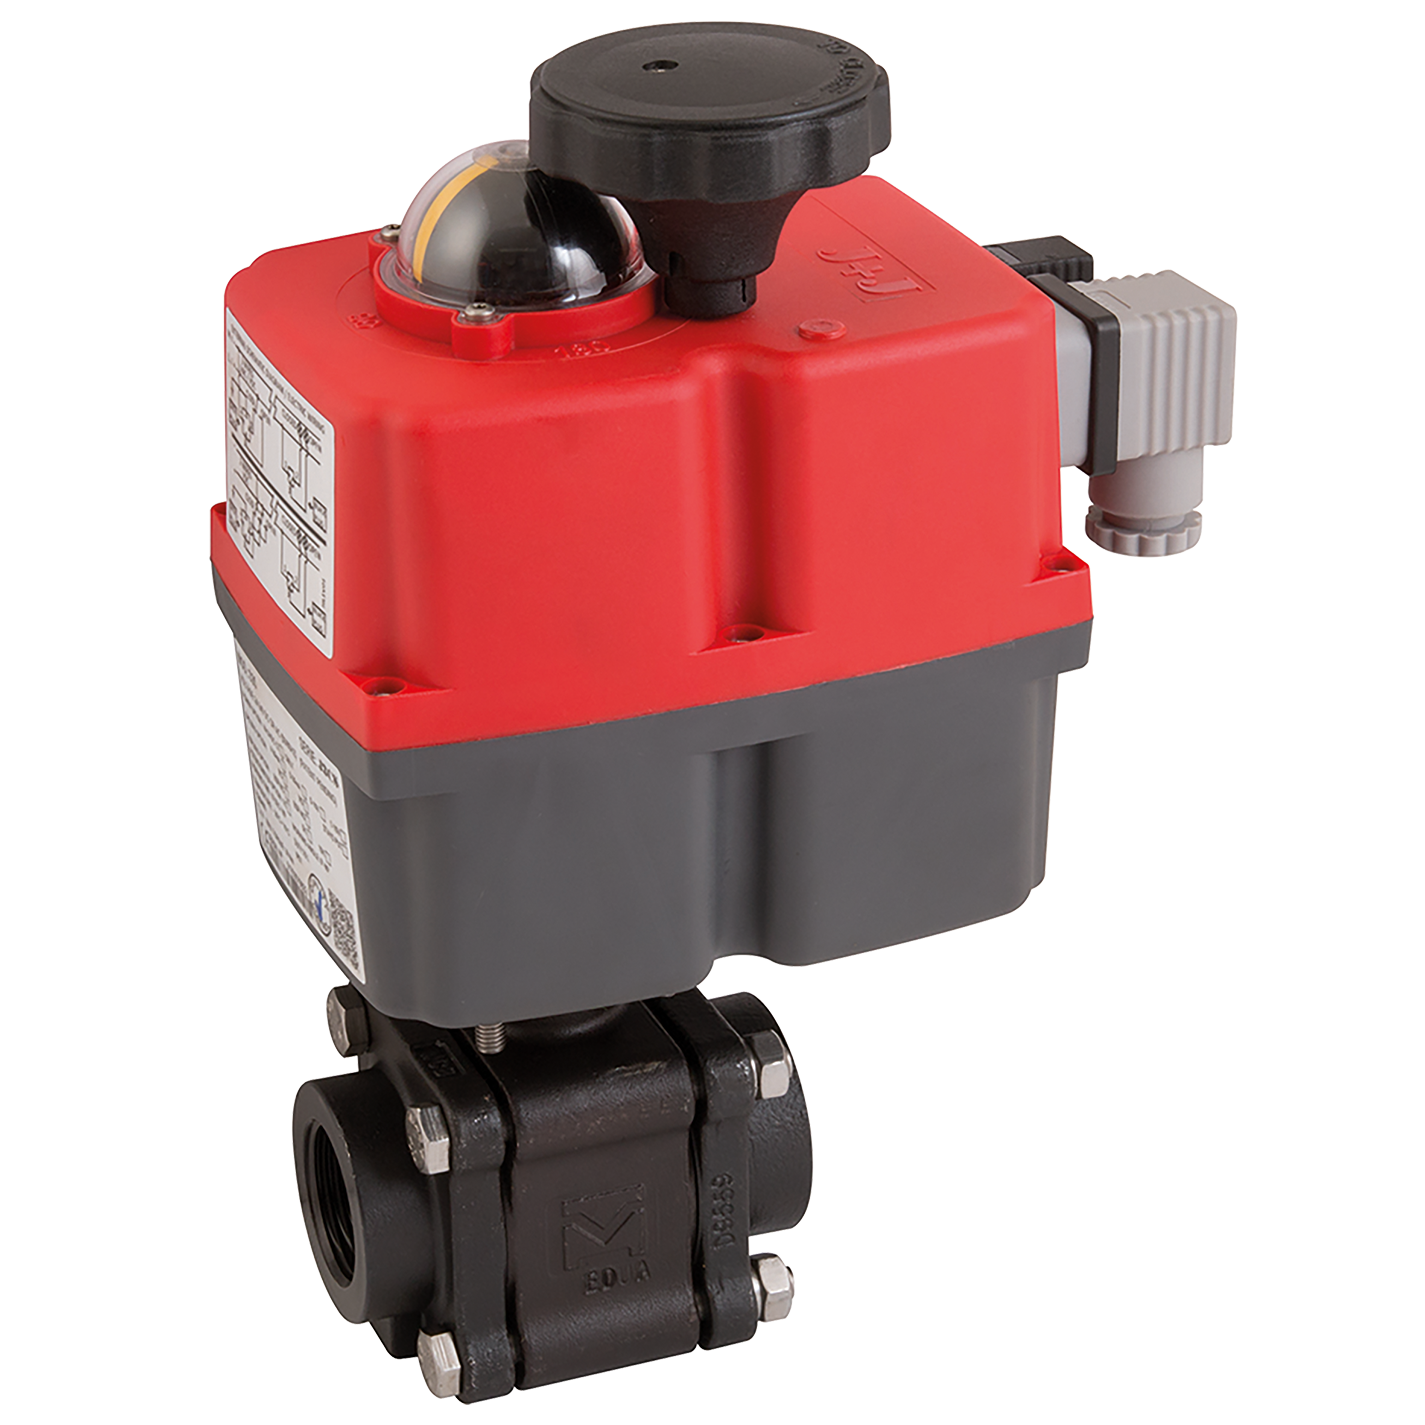 Suppliers of Electric Actuated Carbon Steel Valve UK